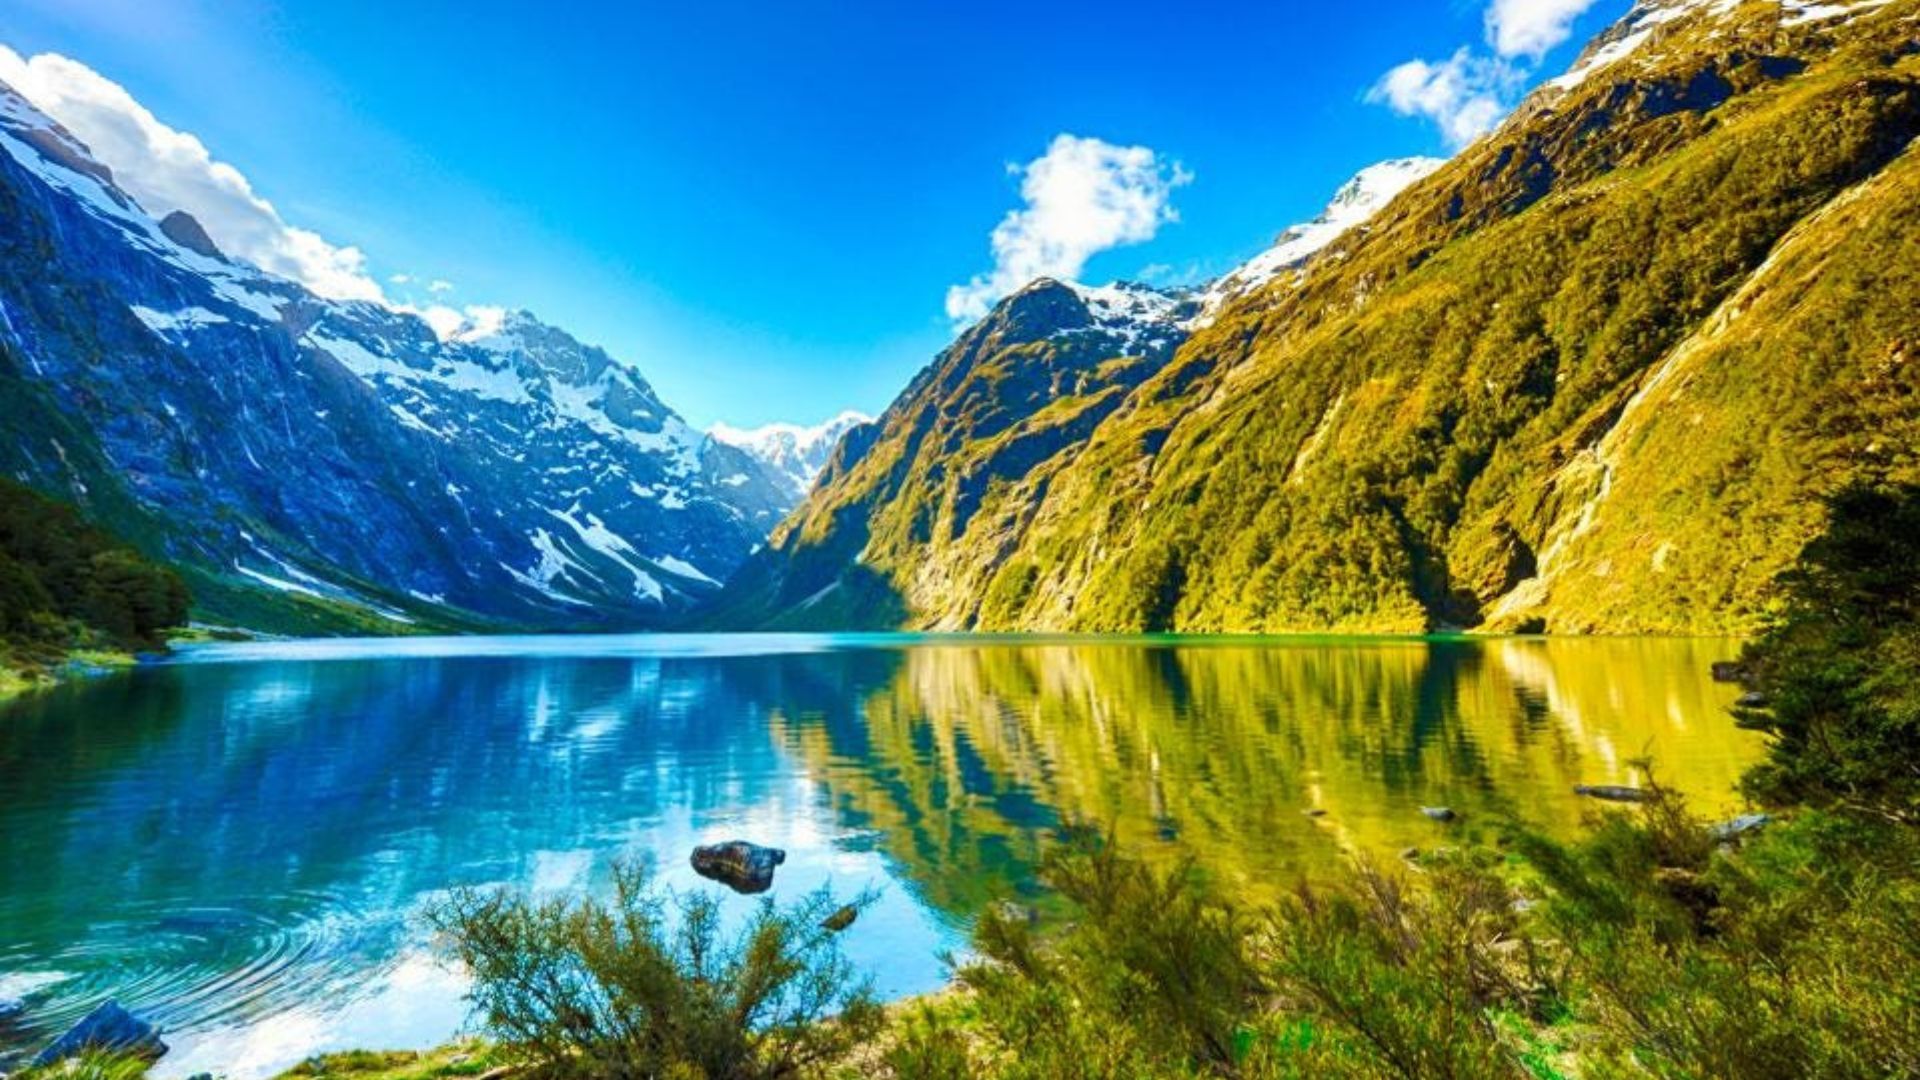 New Zealand returns to travellers following the two-year pandemic lockout